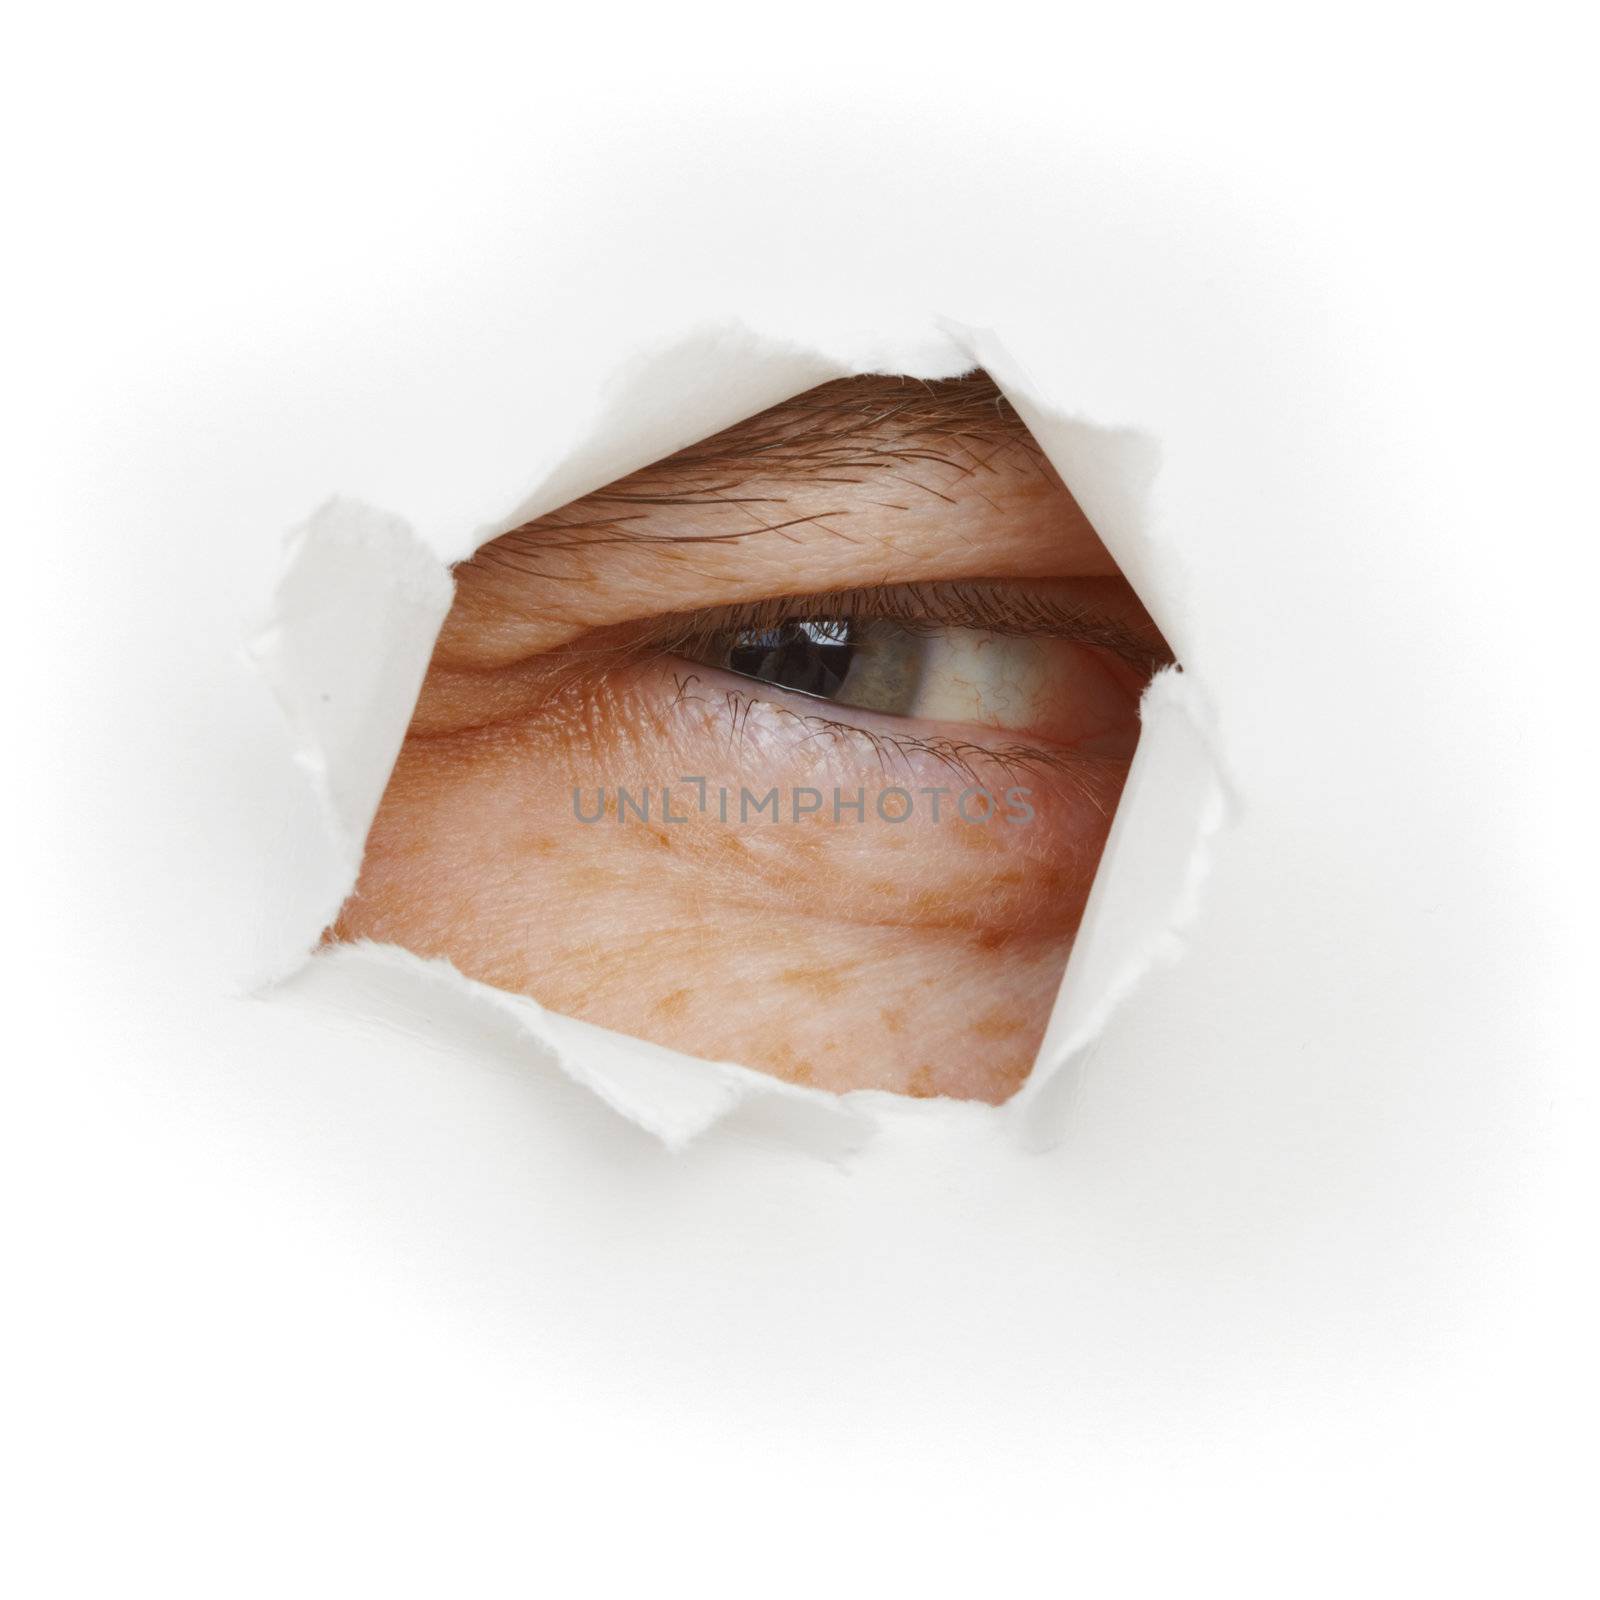 Squinting eye looks through a hole by pzaxe